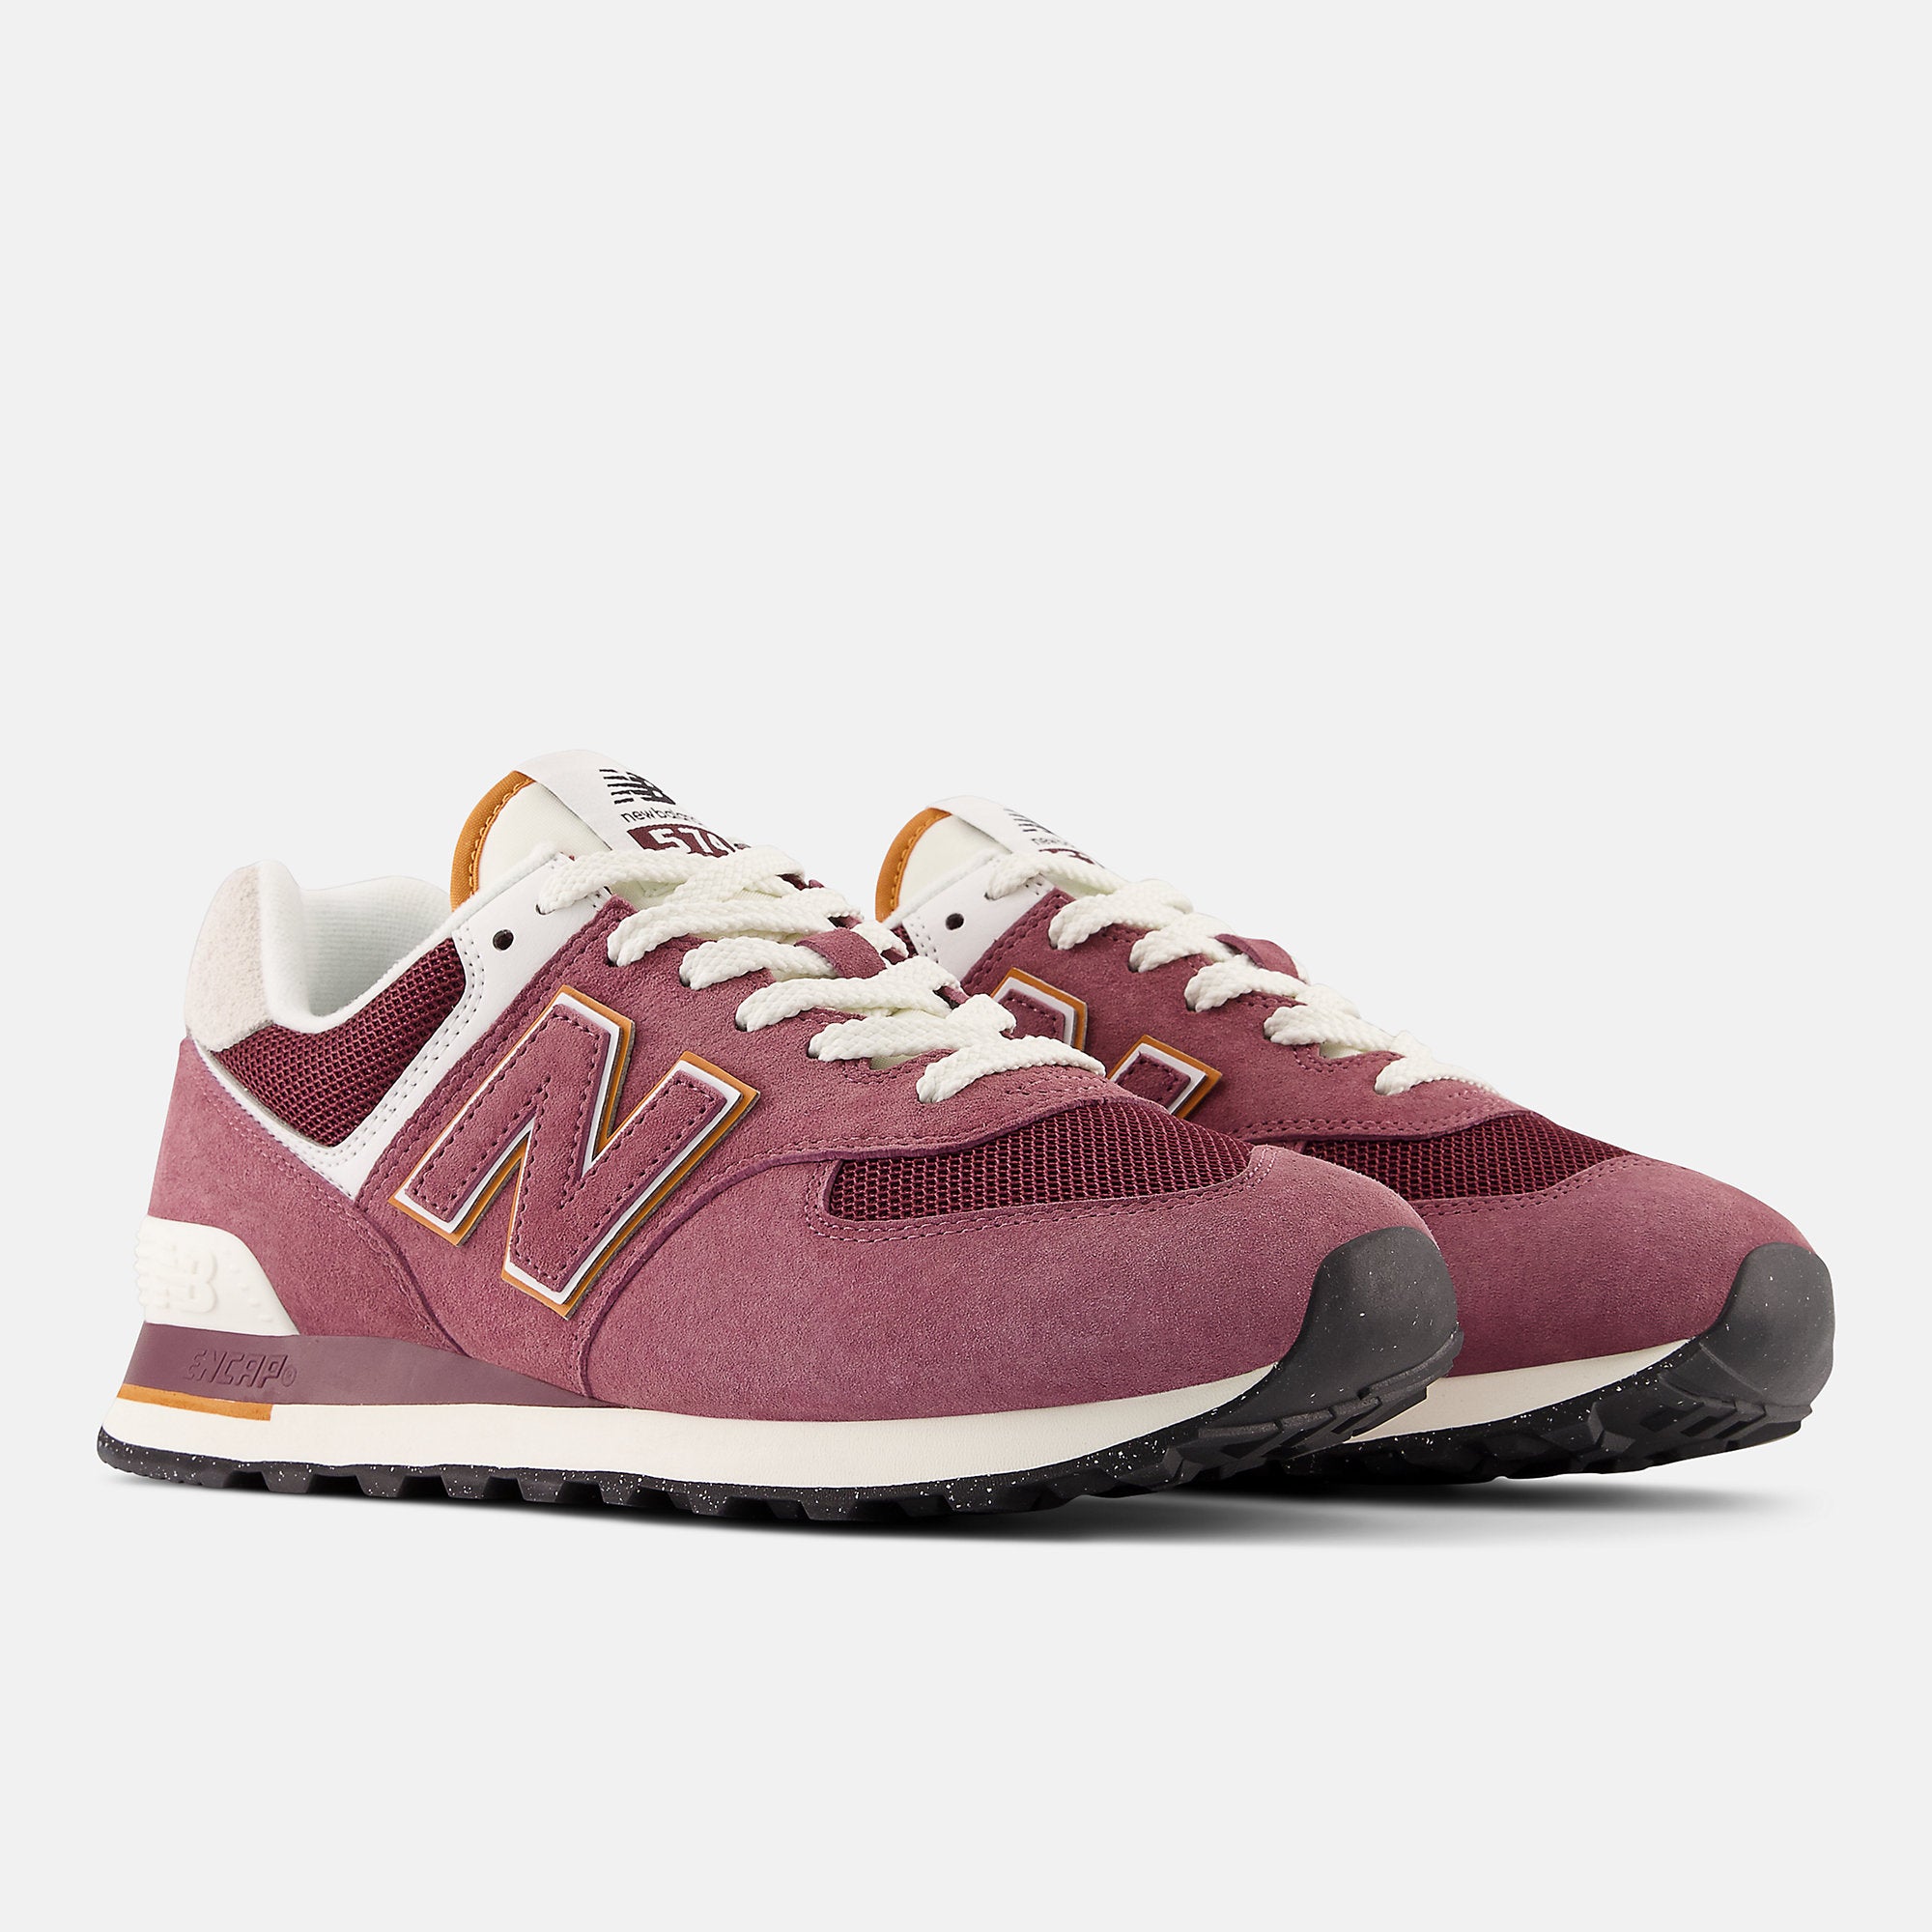 New Balance Mens 574 Fashion Trainers - Burgundy - The Foot Factory